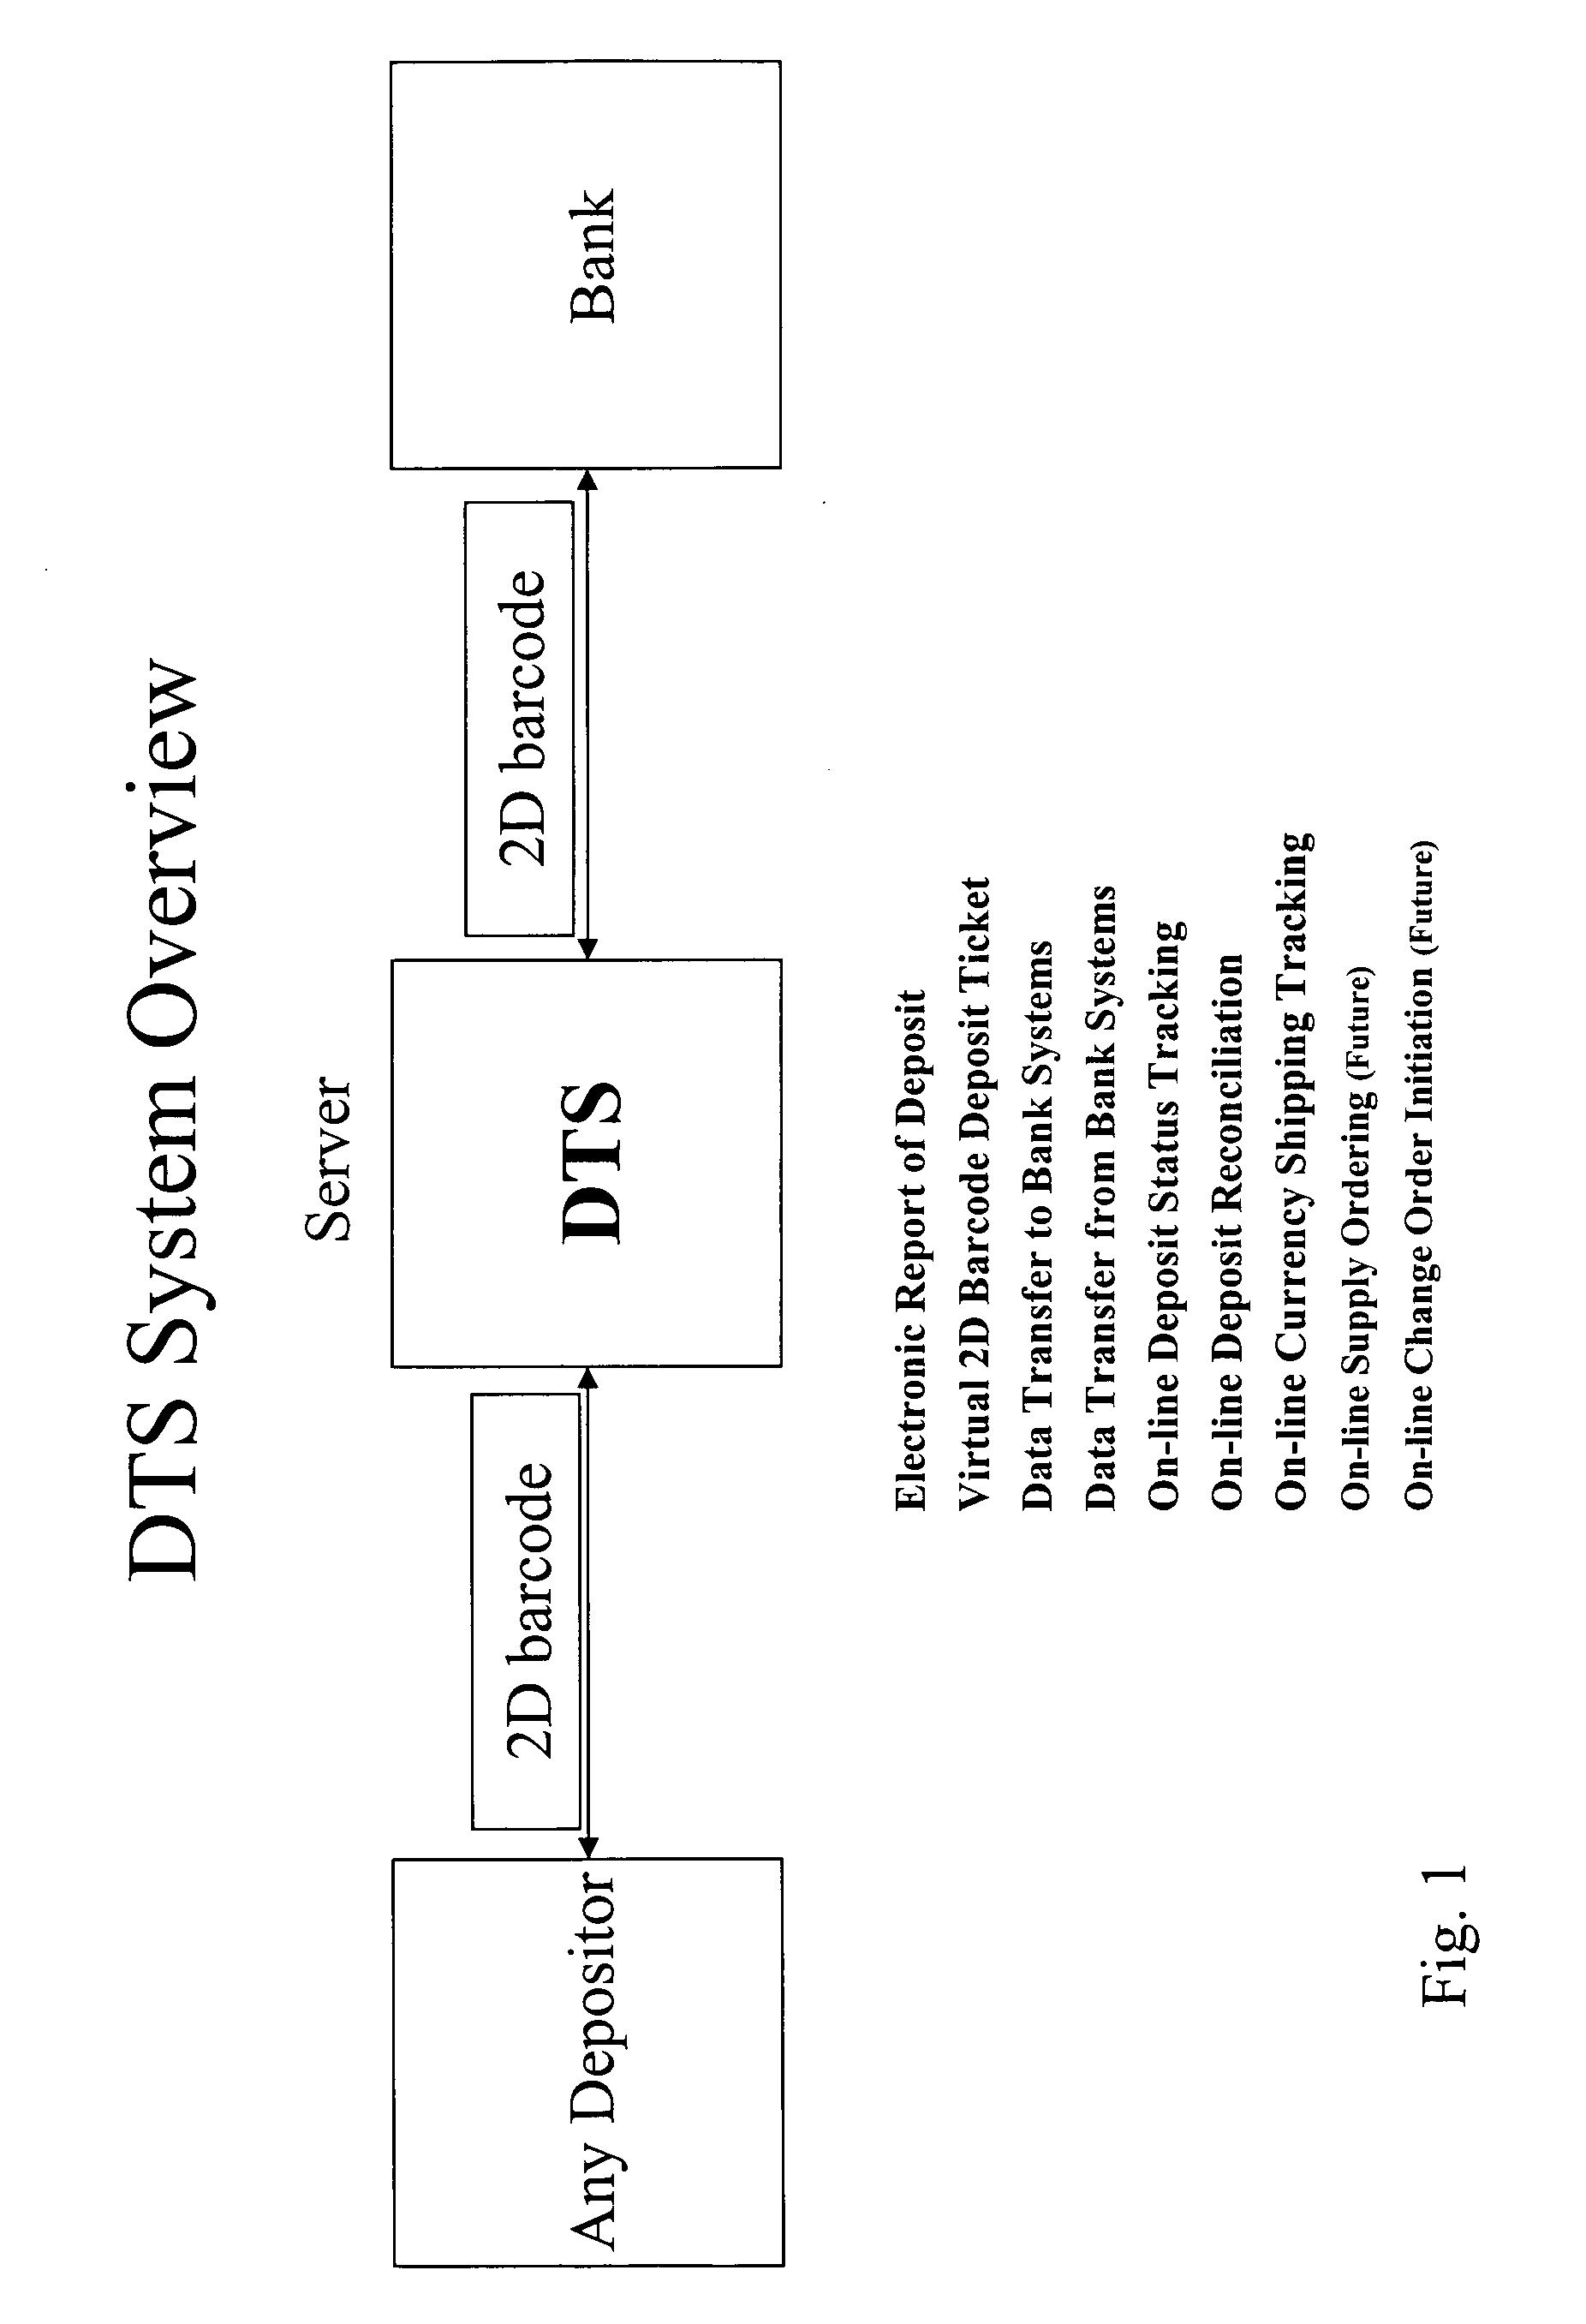 System and method to create electronic deposit records and to track the status of a deposit